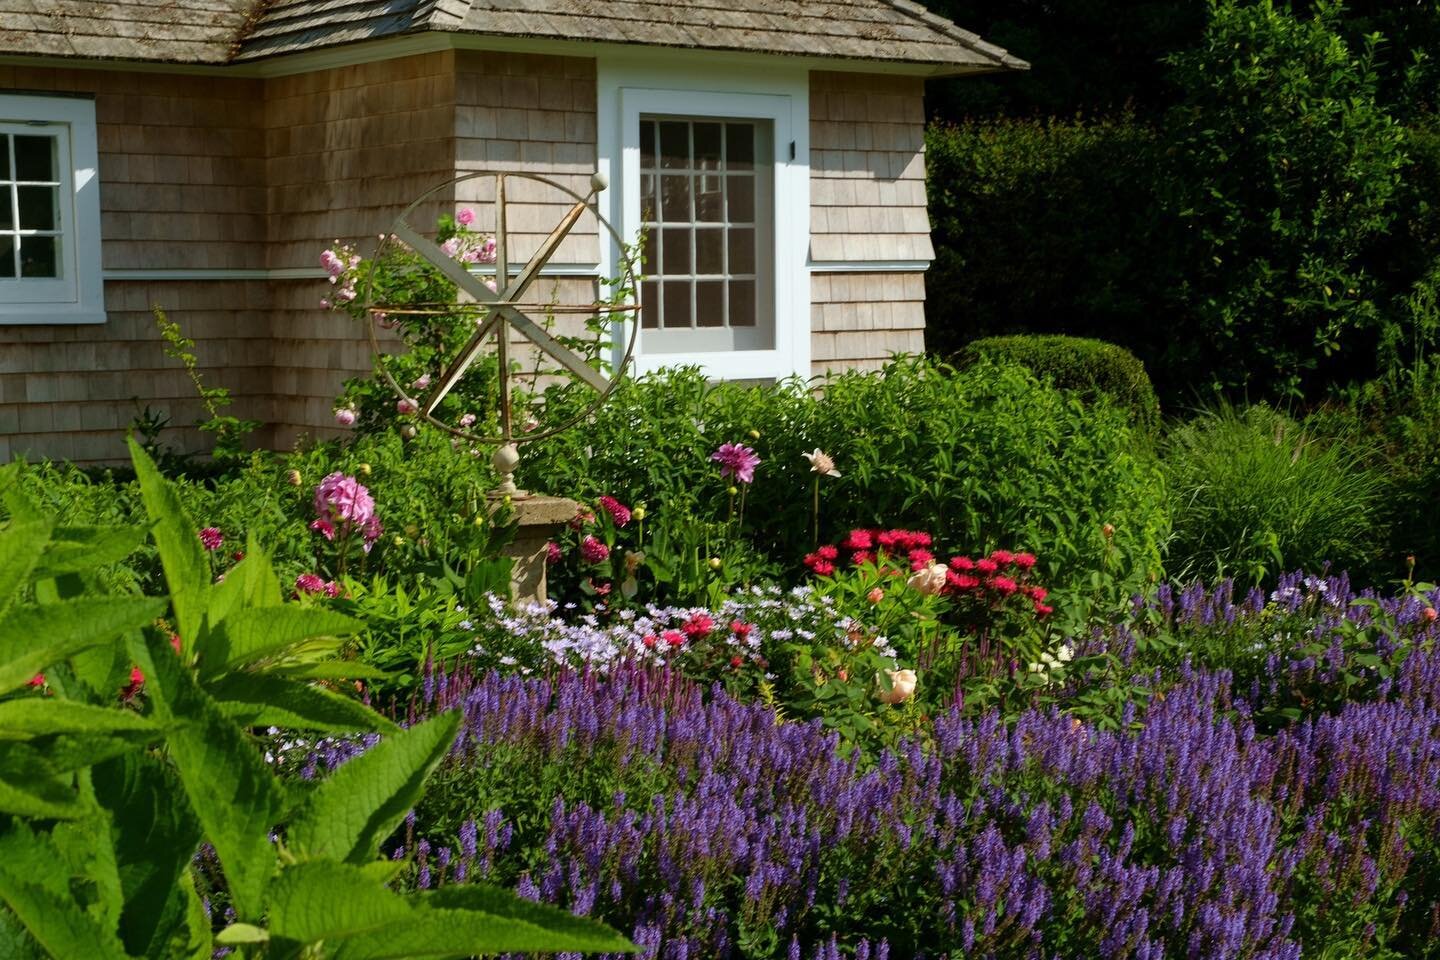 Enjoy the gardens this weekend.